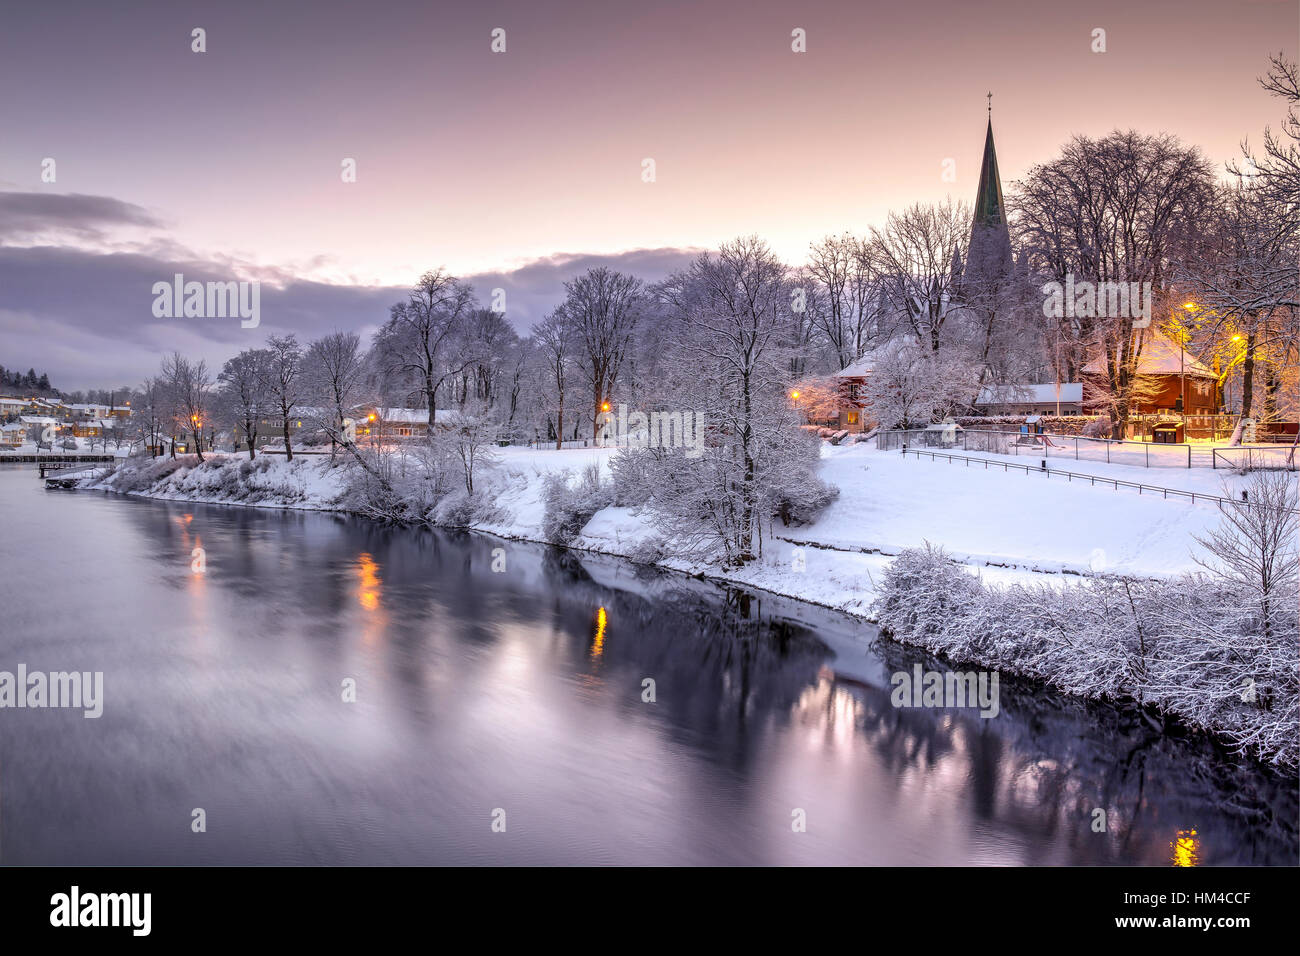 Winter in Trondheim, Norway with view of the Nidaros Cathedral. Stock Photo